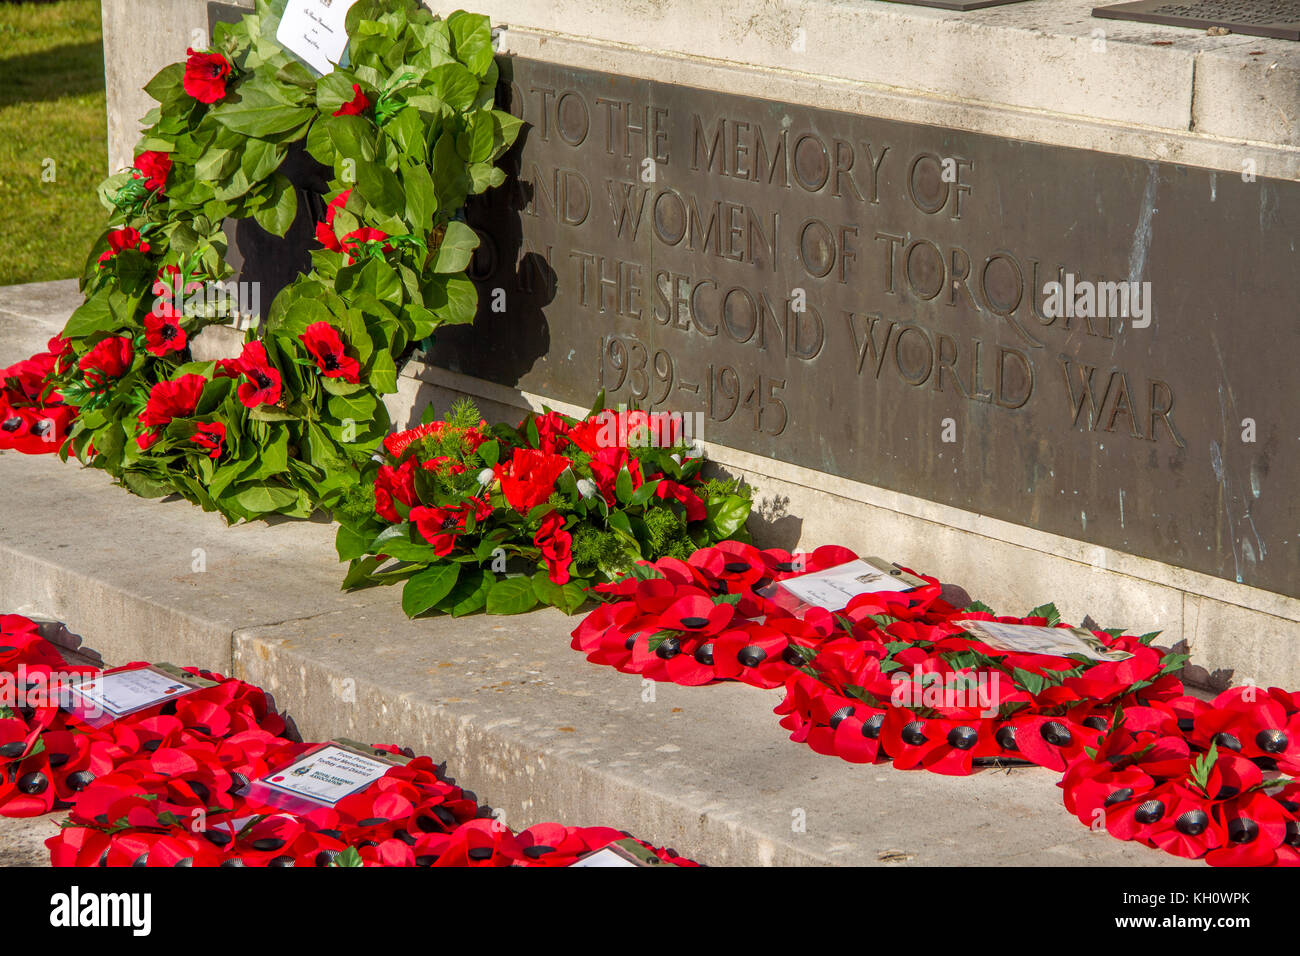 Poppies in wreaths lying on the Cenotaph war memorial at Torquay, laid during the Remembrance Sunday ceremony in Princess Gardens, Torquay, Devon, UK. 12th November 2017. Stock Photo